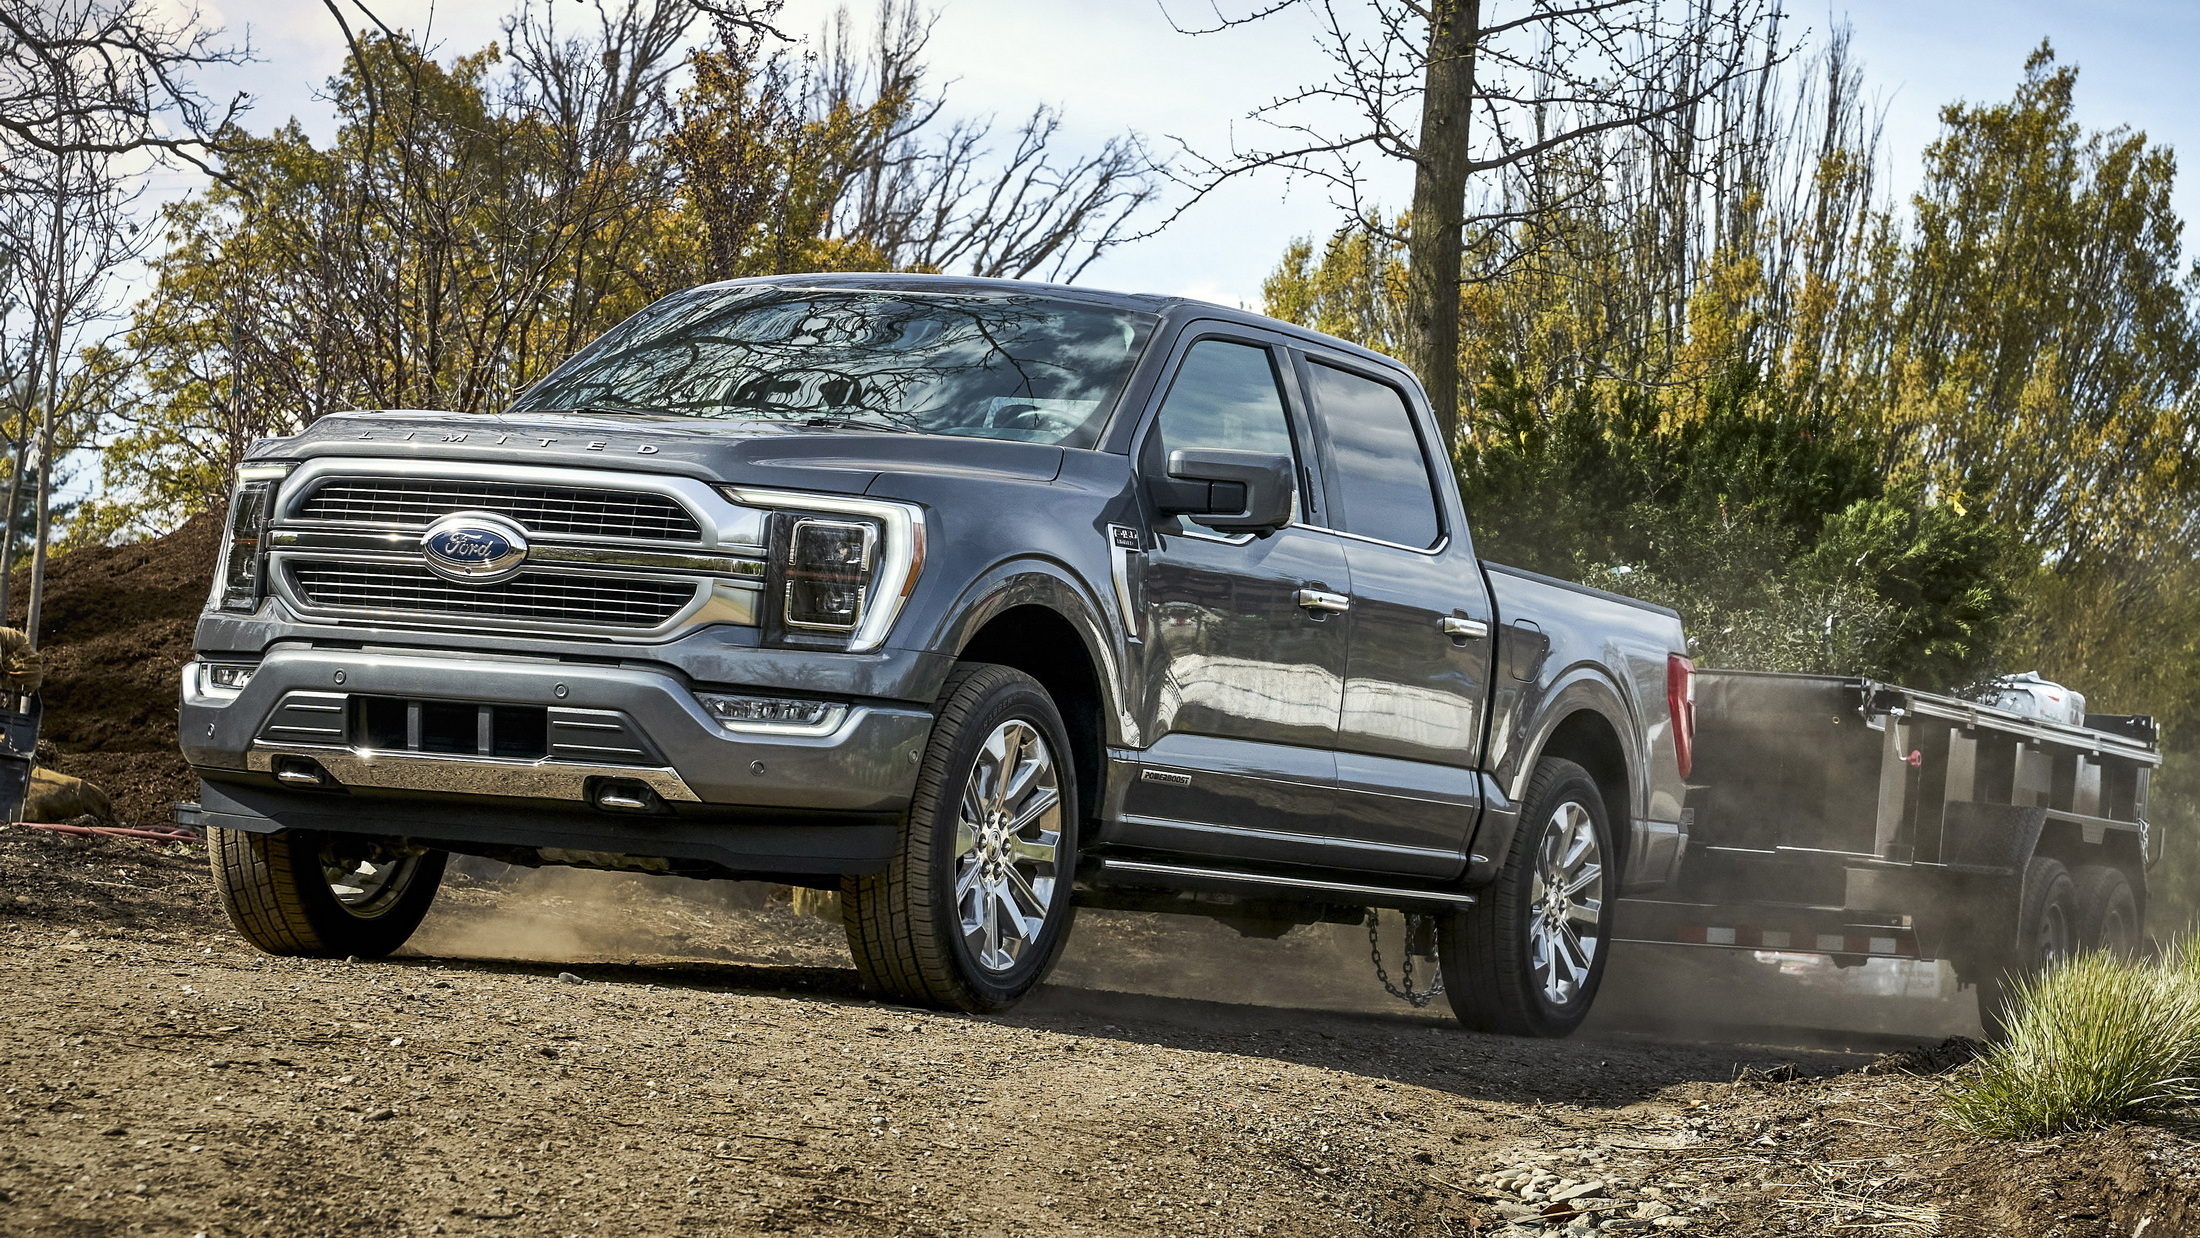 Worst years for ford f-150